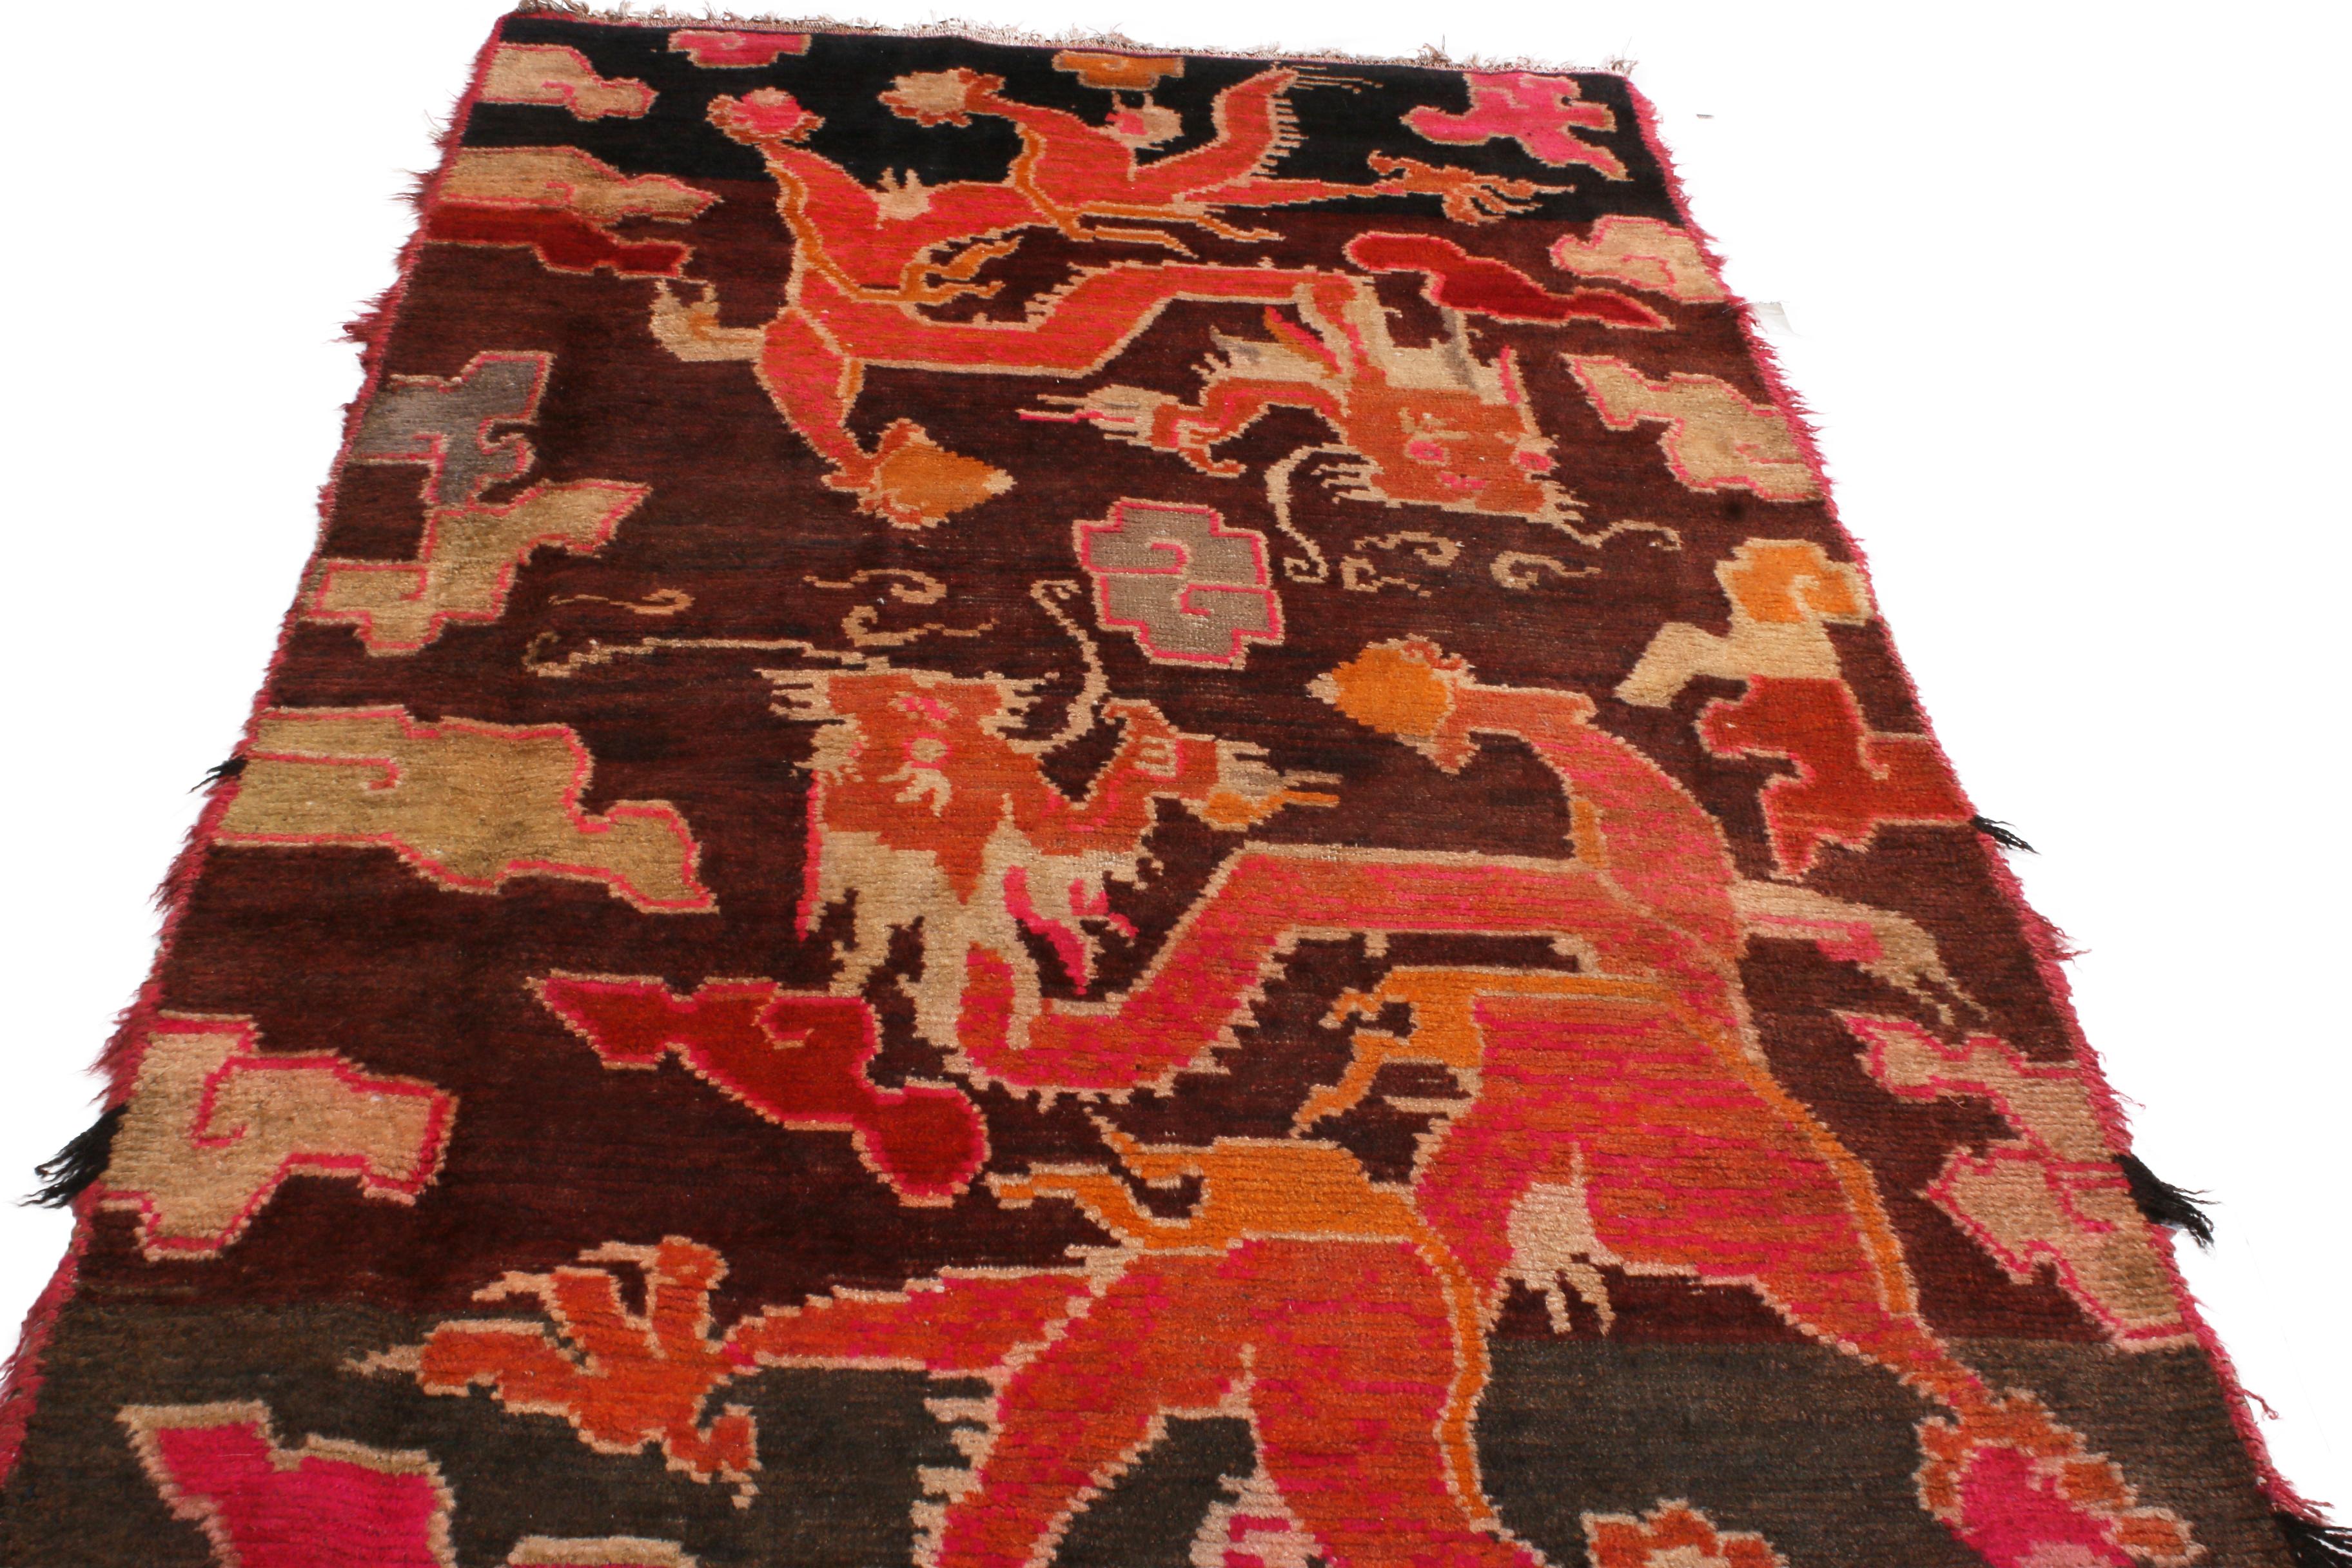 Hand knotted in high-quality wool originating from Tibet between 1890-1900, this antique transitional rug employs a culturally iconic field design portraying mirrored dragons and ruyi clouds with a unique combination of vibrant orange, pink, and